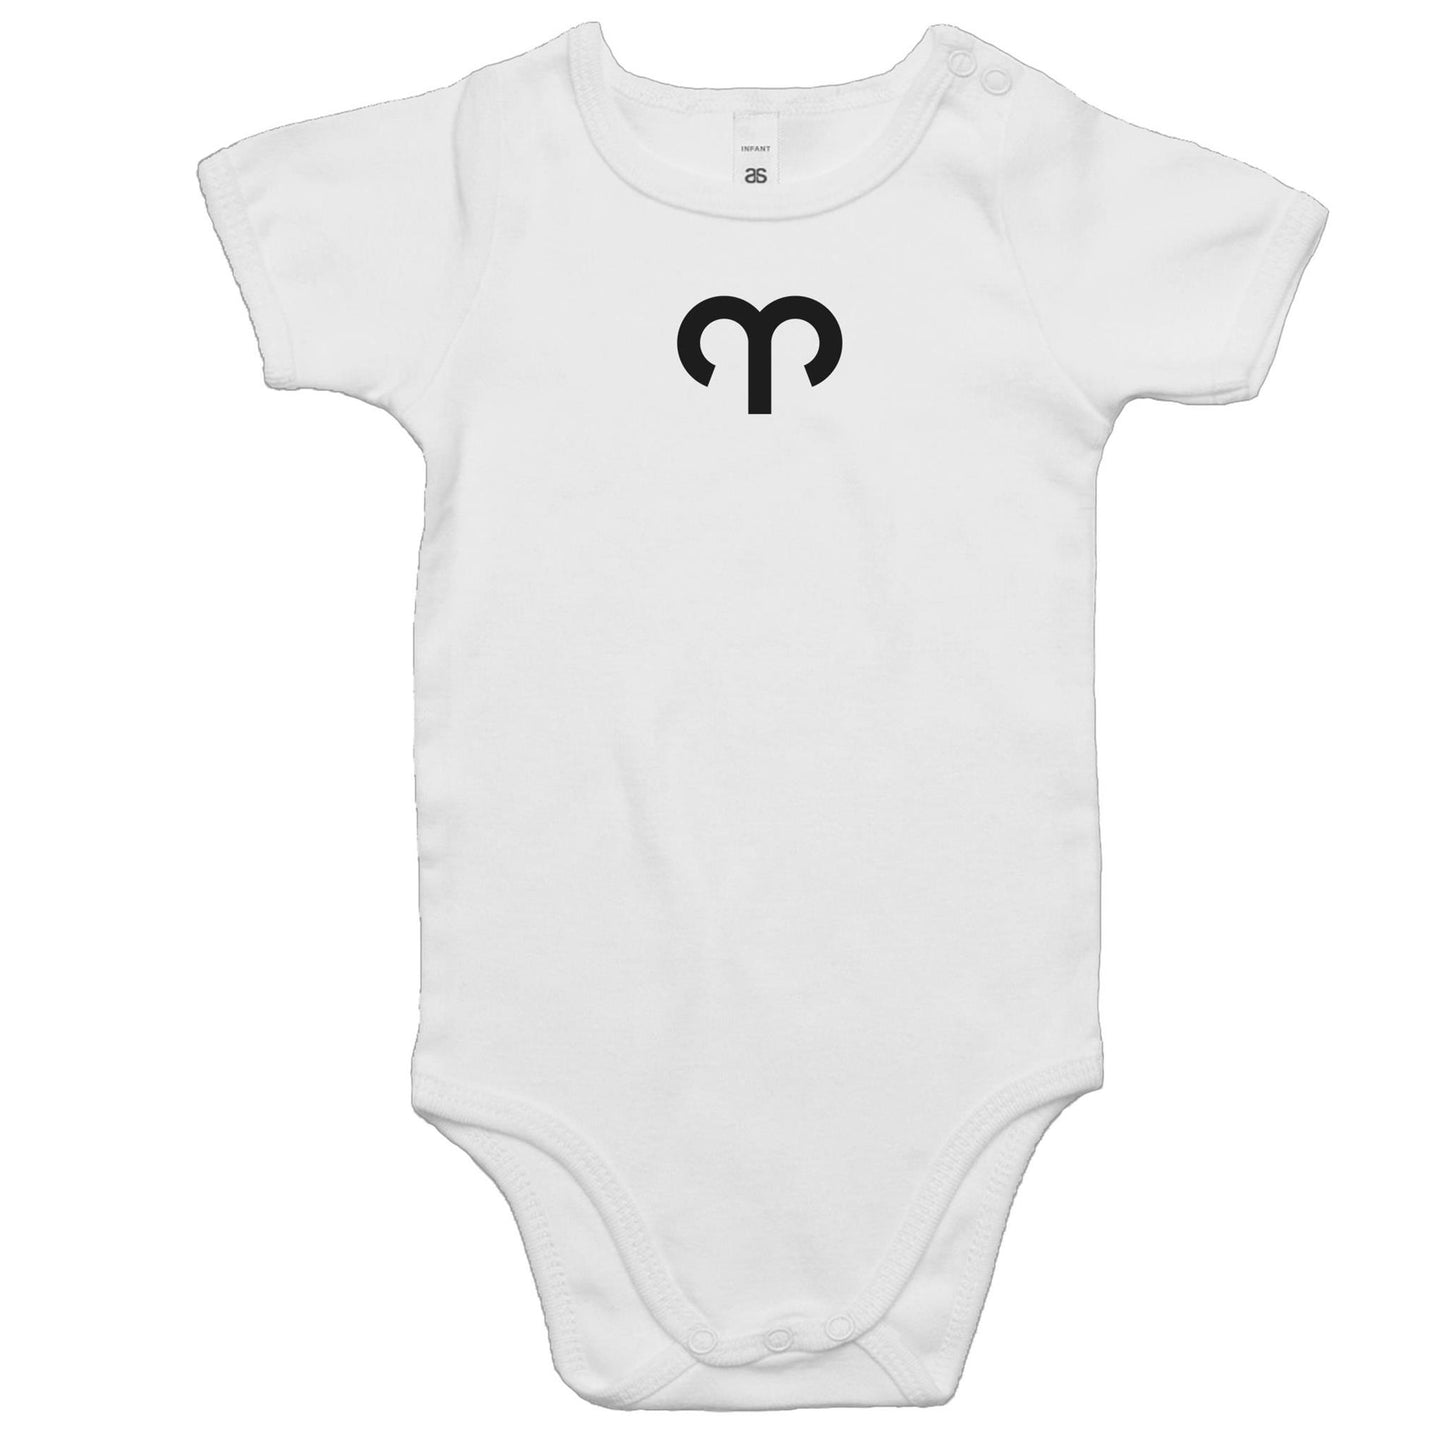 Aries Rompers for Babies